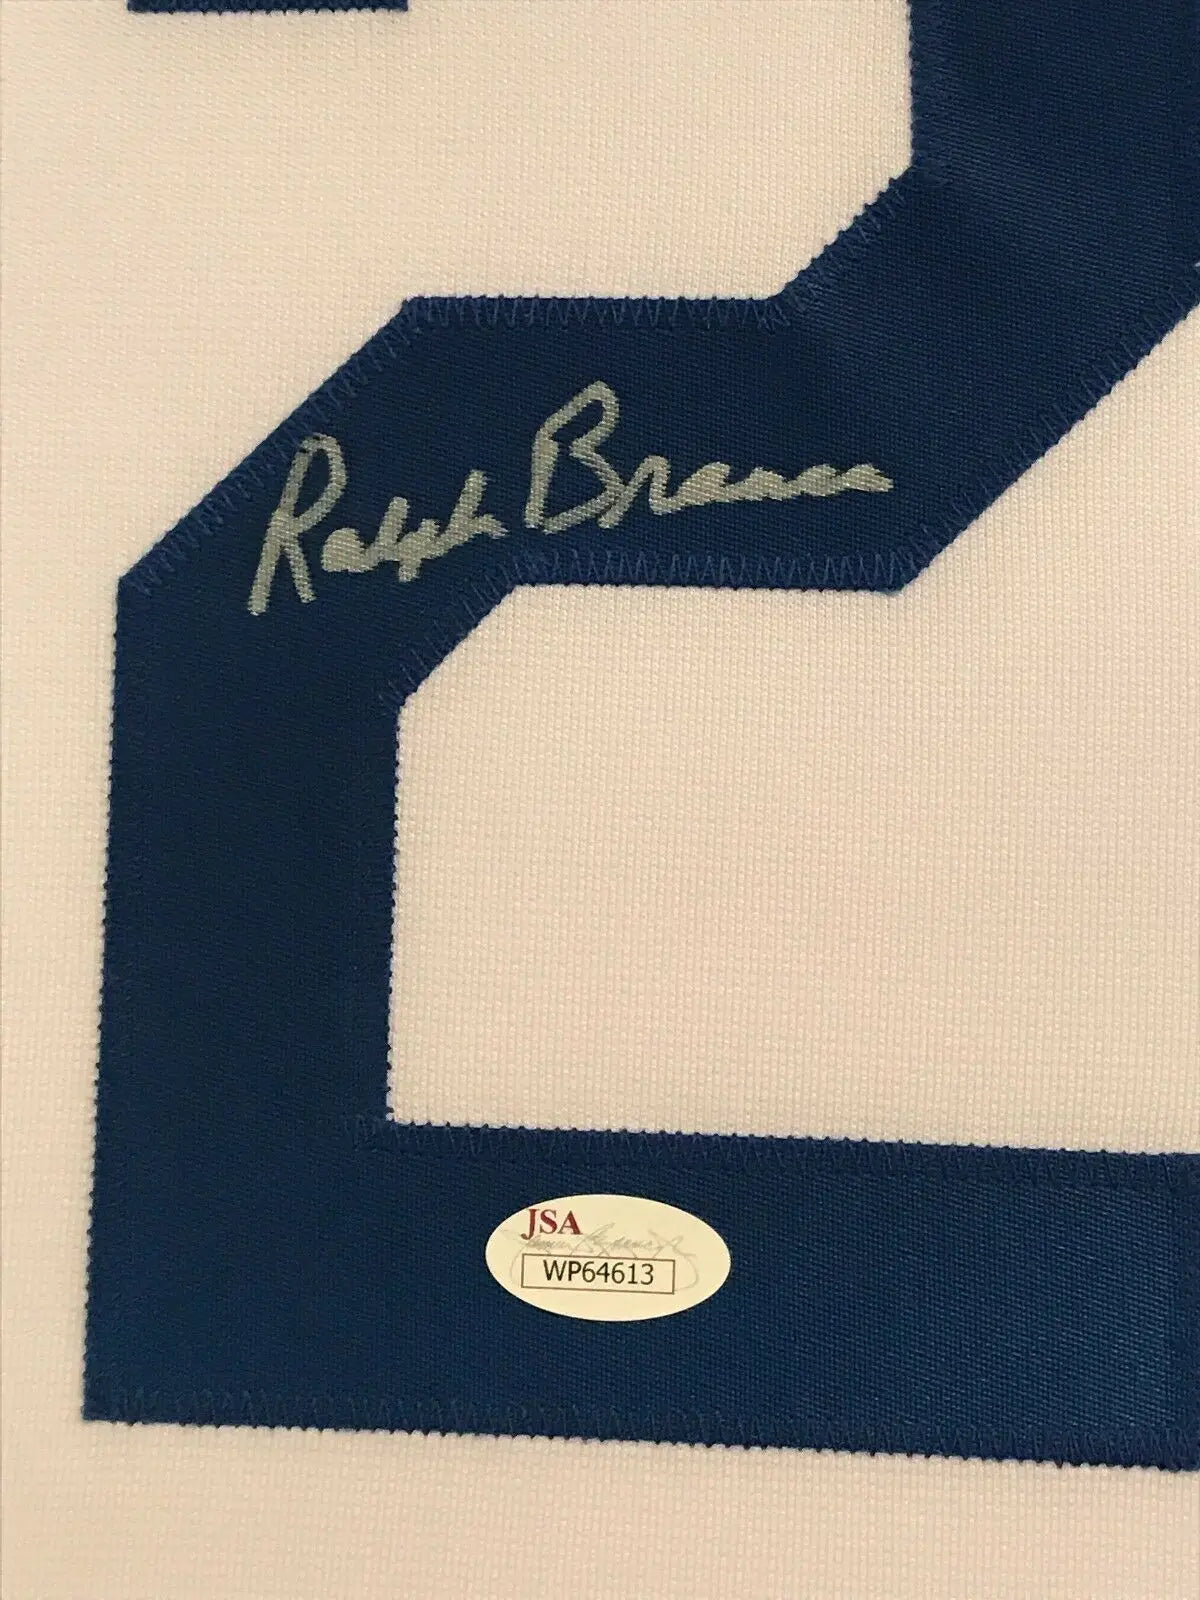 Ralph Branca Signed Dodgers Jersey. The man best-known for giving, Lot  #64066